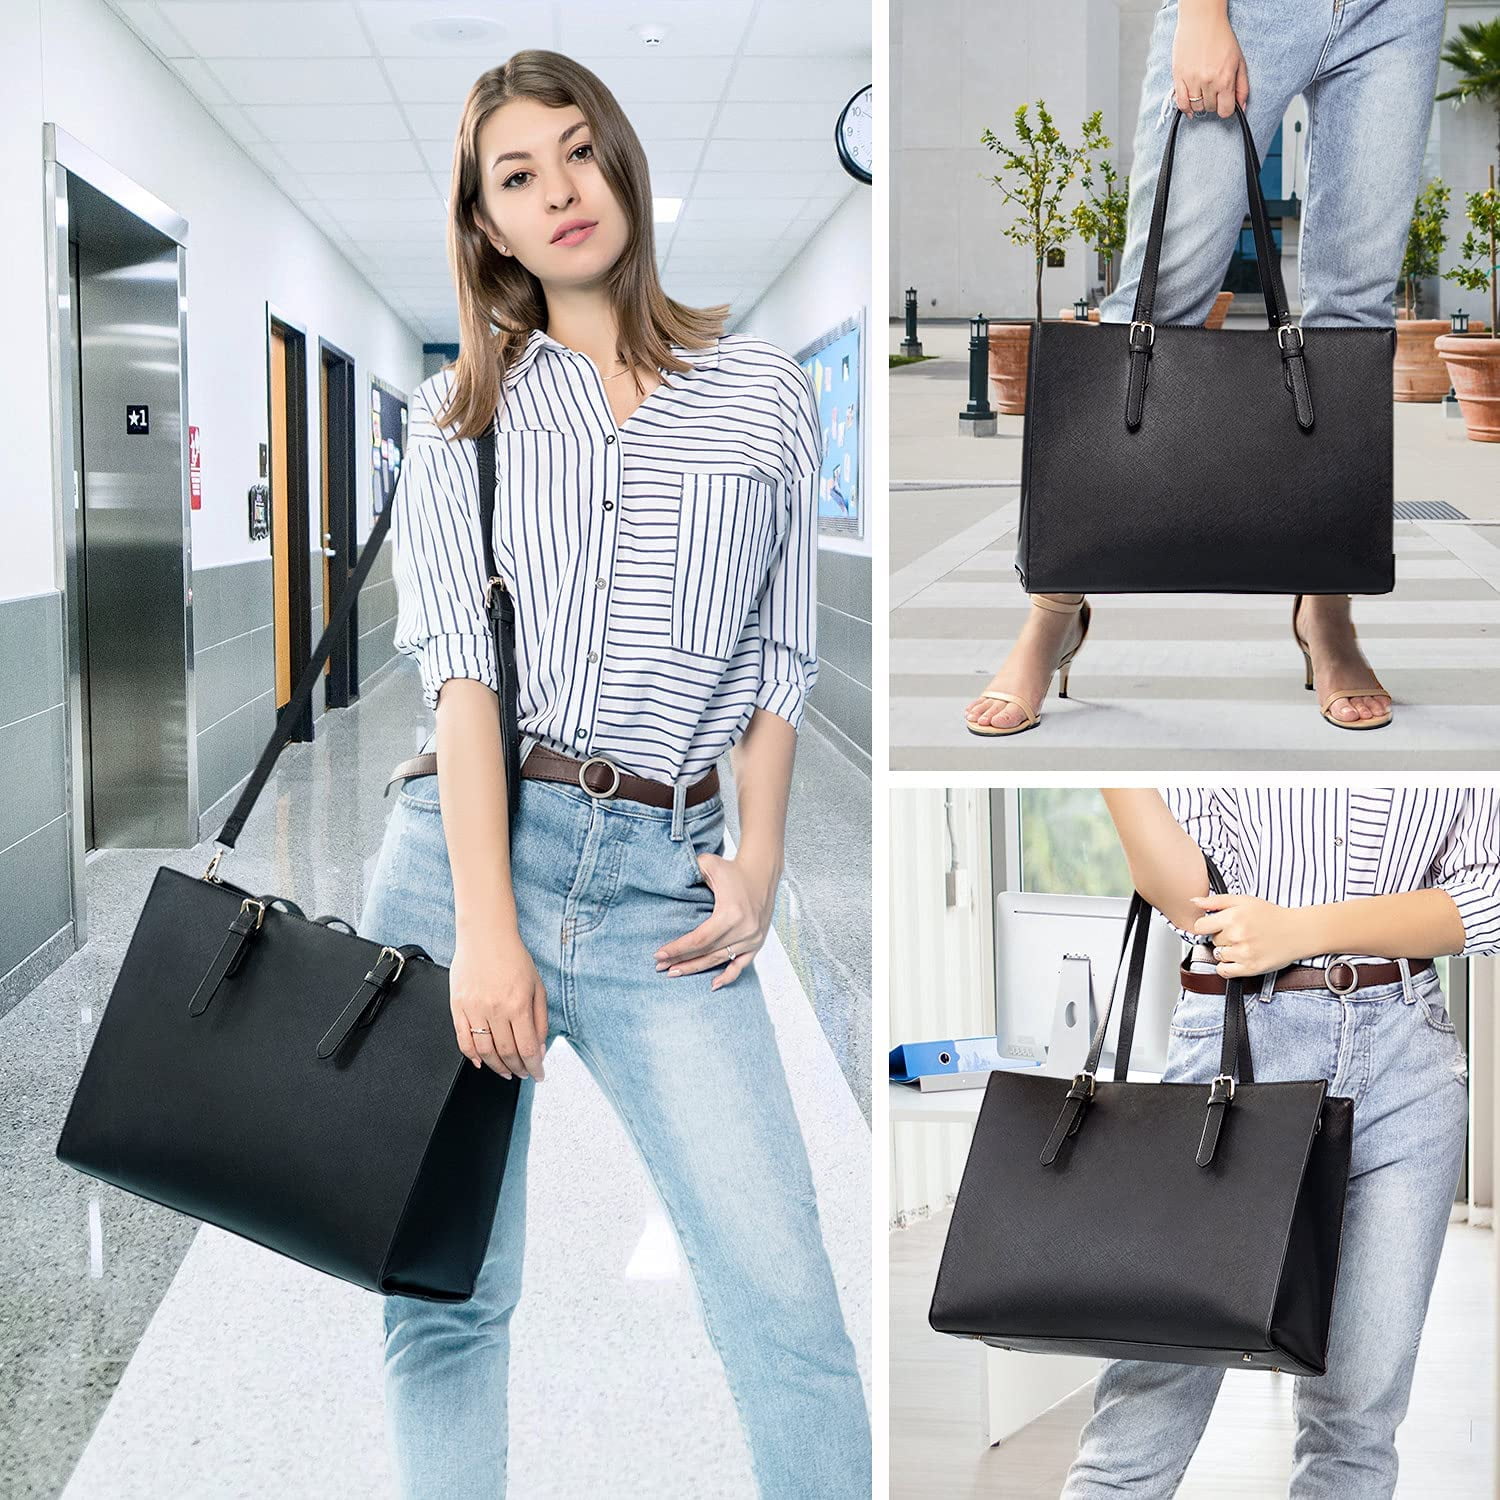 Women’s work bag – a wide range of styles to choose from